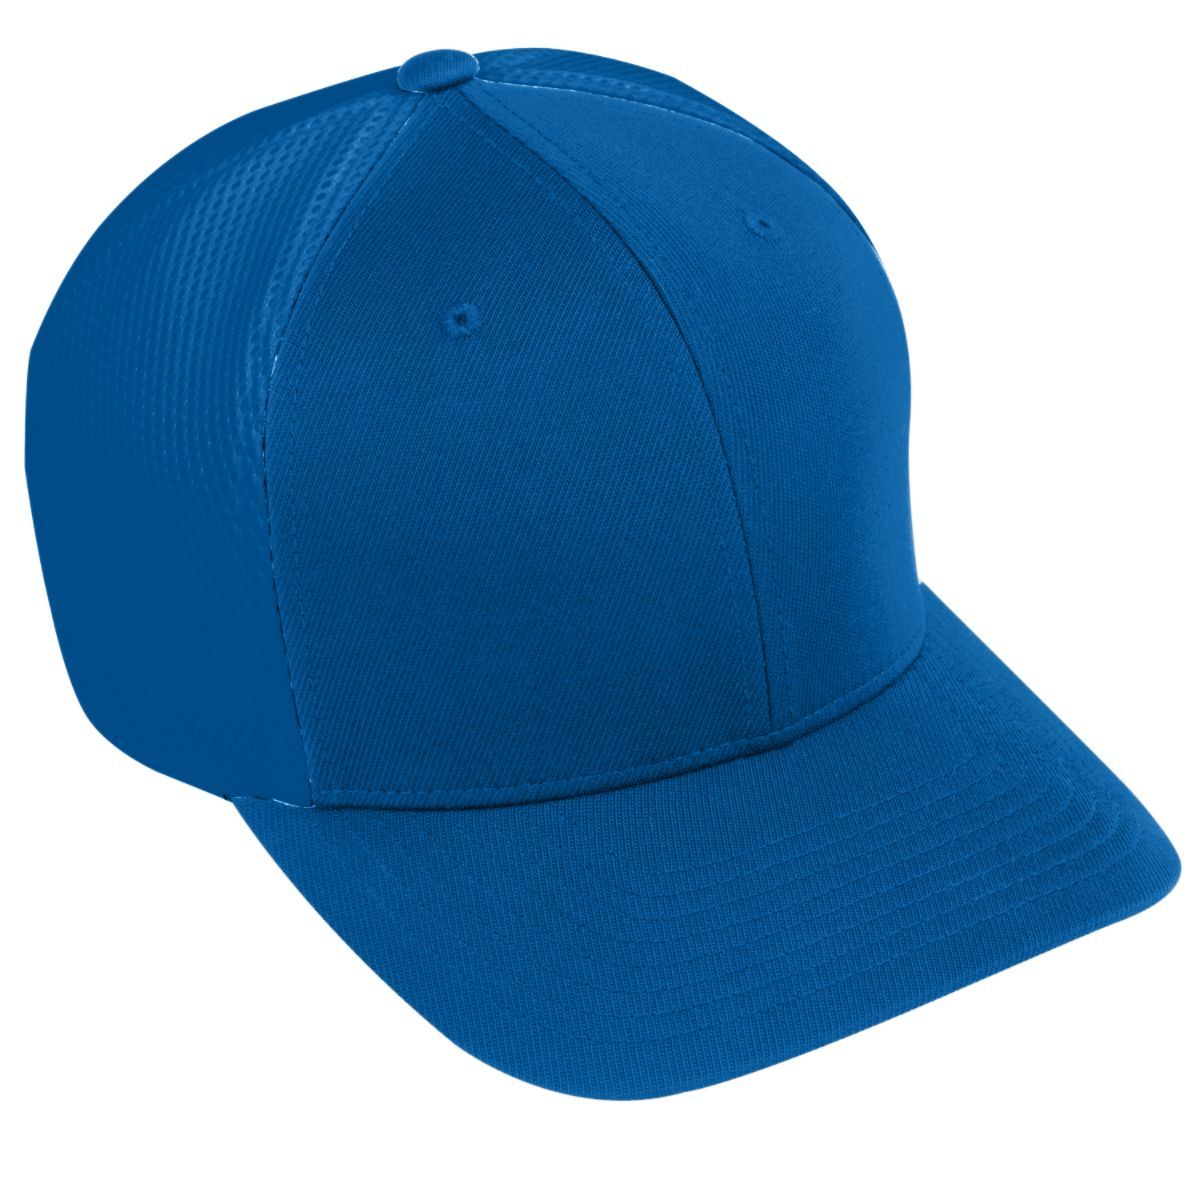 Augusta Sportswear Flexfit Vapor Cap in Royal/Royal  -Part of the Adult, Augusta-Products, Headwear, Headwear-Cap product lines at KanaleyCreations.com